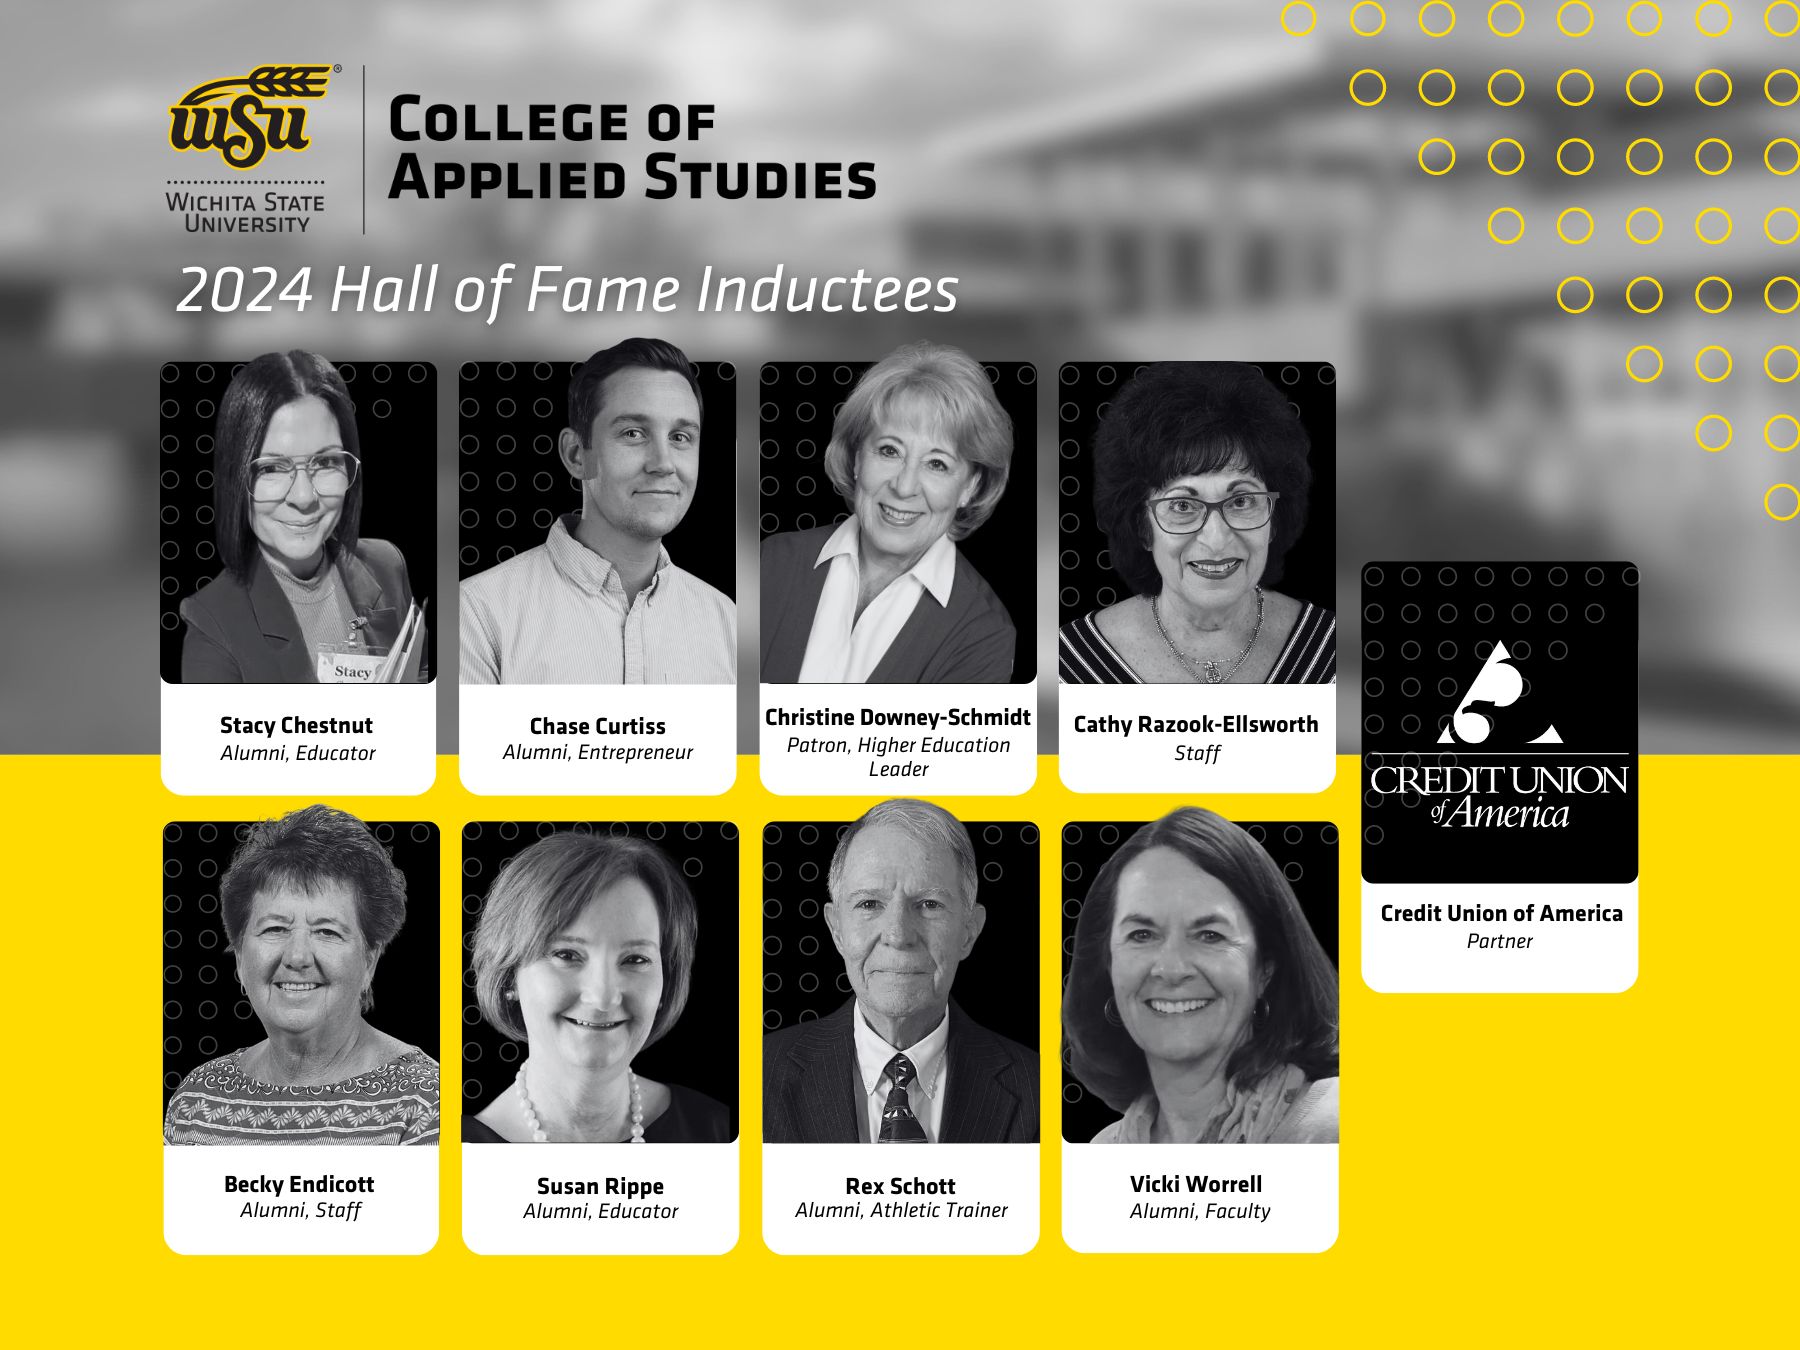 Graphic with pictures and titles of new CAS hall of fame members - Stacy Chestnut, Chase Curtiss, Christine Downey-Schmidt, Cathy Razook-Ellsworth, Becky Endicott, Susan Rippe, Rex Schott, Vicki Worrell